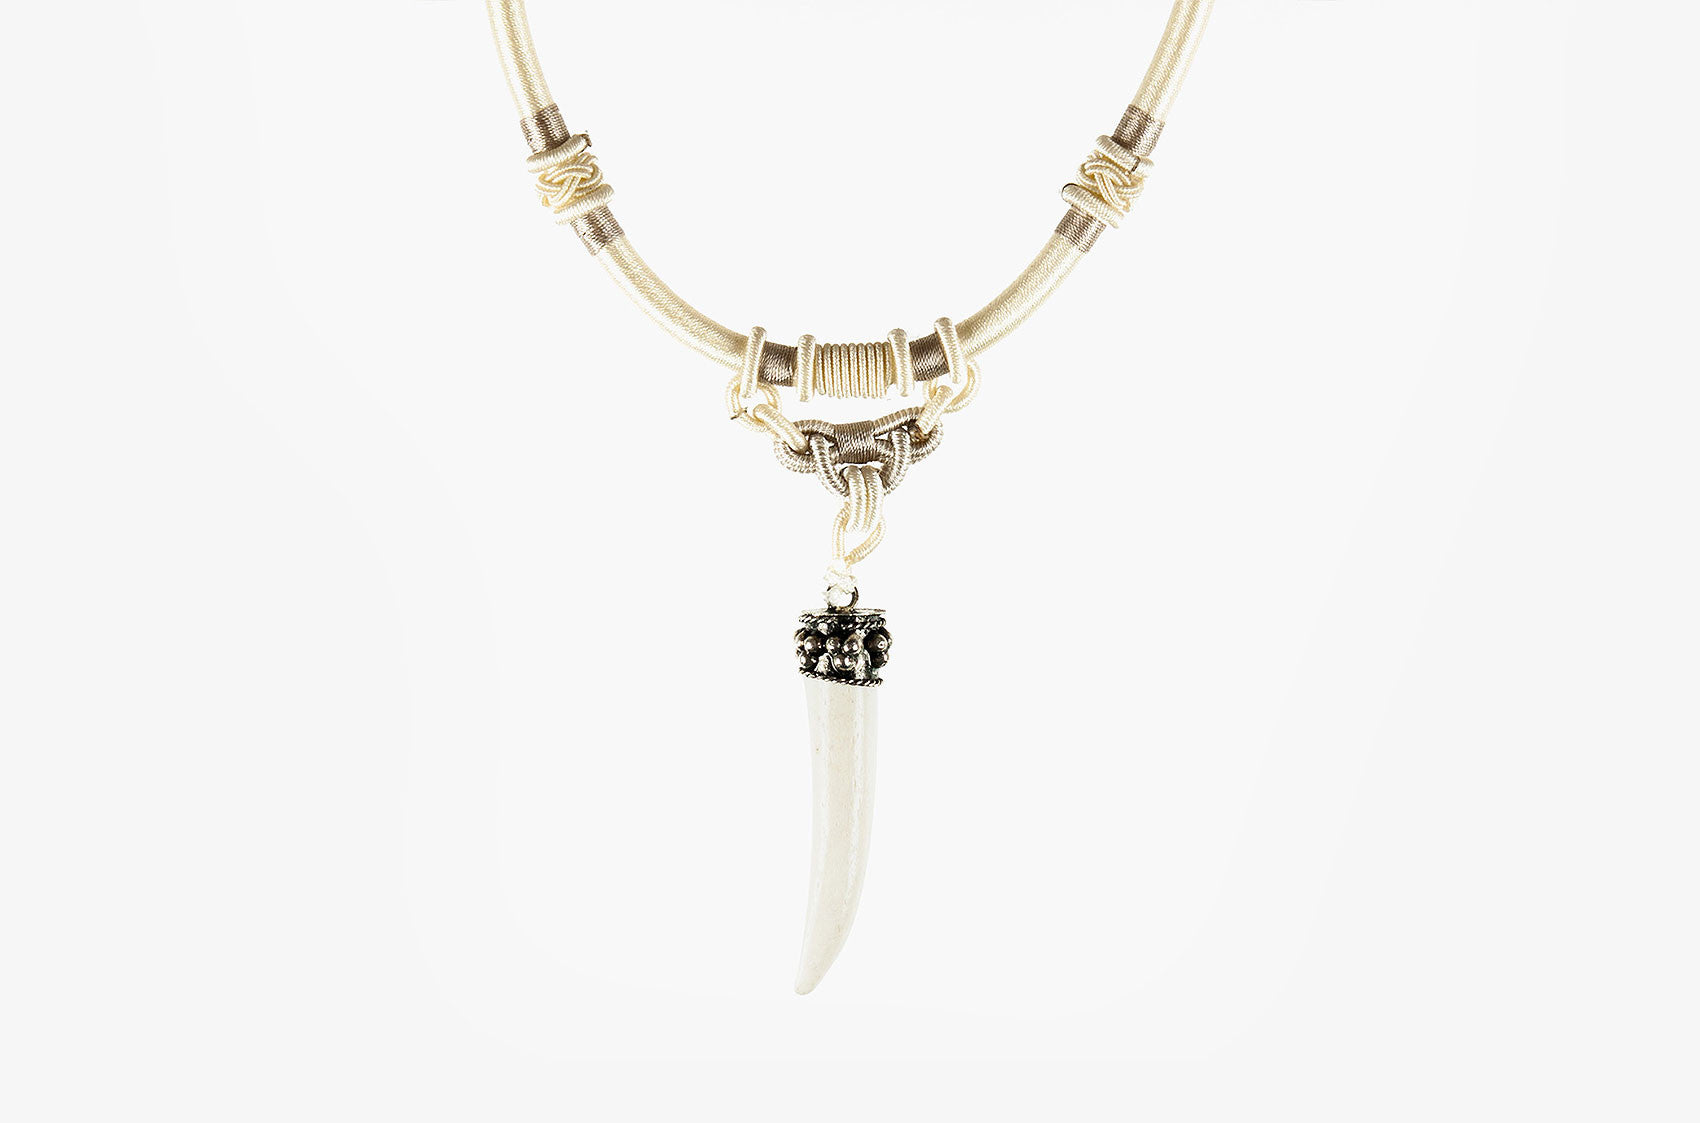 Tribal woven necklace with bone spike pendant